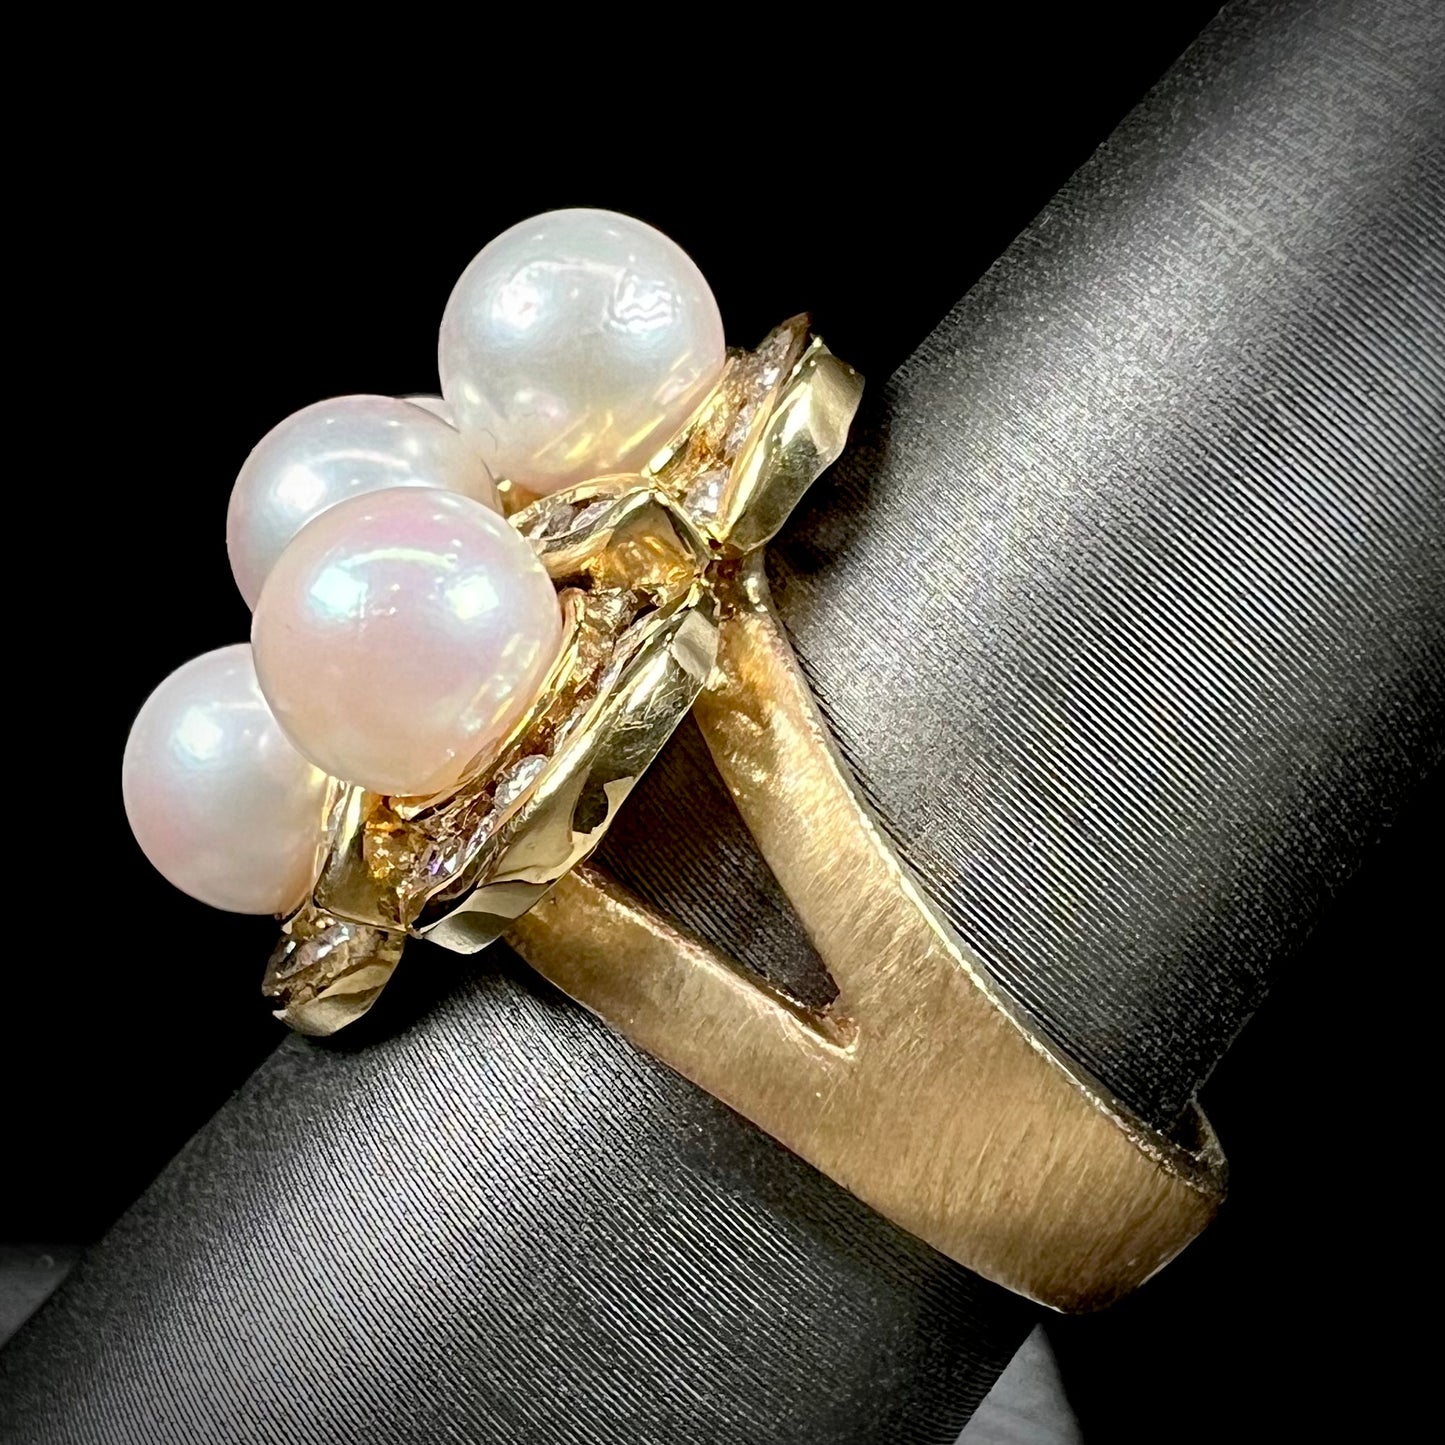 A ladies' vintage 1960's pink Akoya pearl and diamond quatrefoil ring.  The shank of the ring is textured.